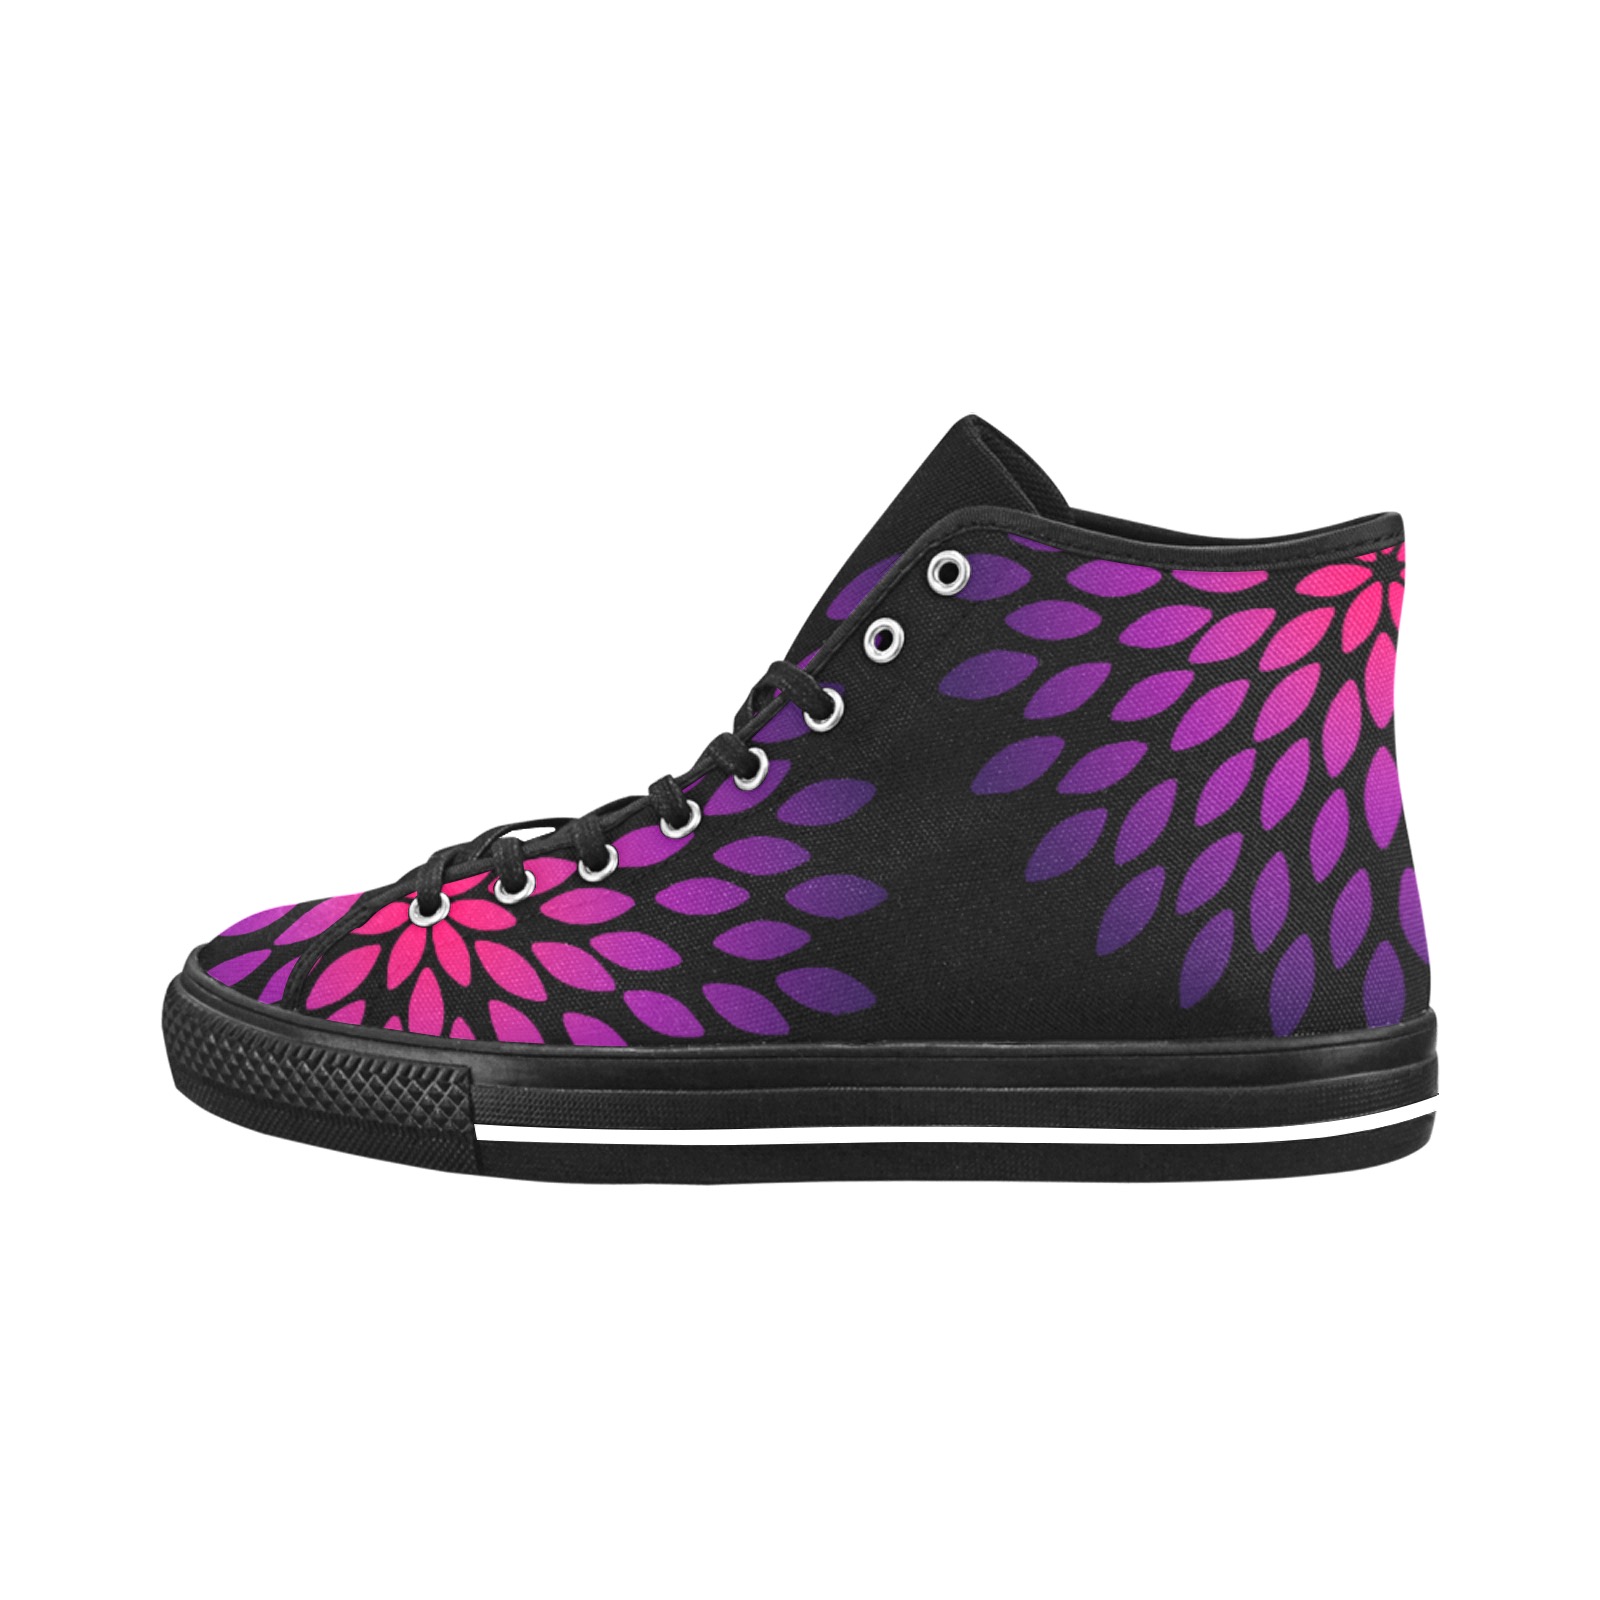 Ô Pink and Violet Zinnia on Black Vancouver H Women's Canvas Shoes (1013-1)